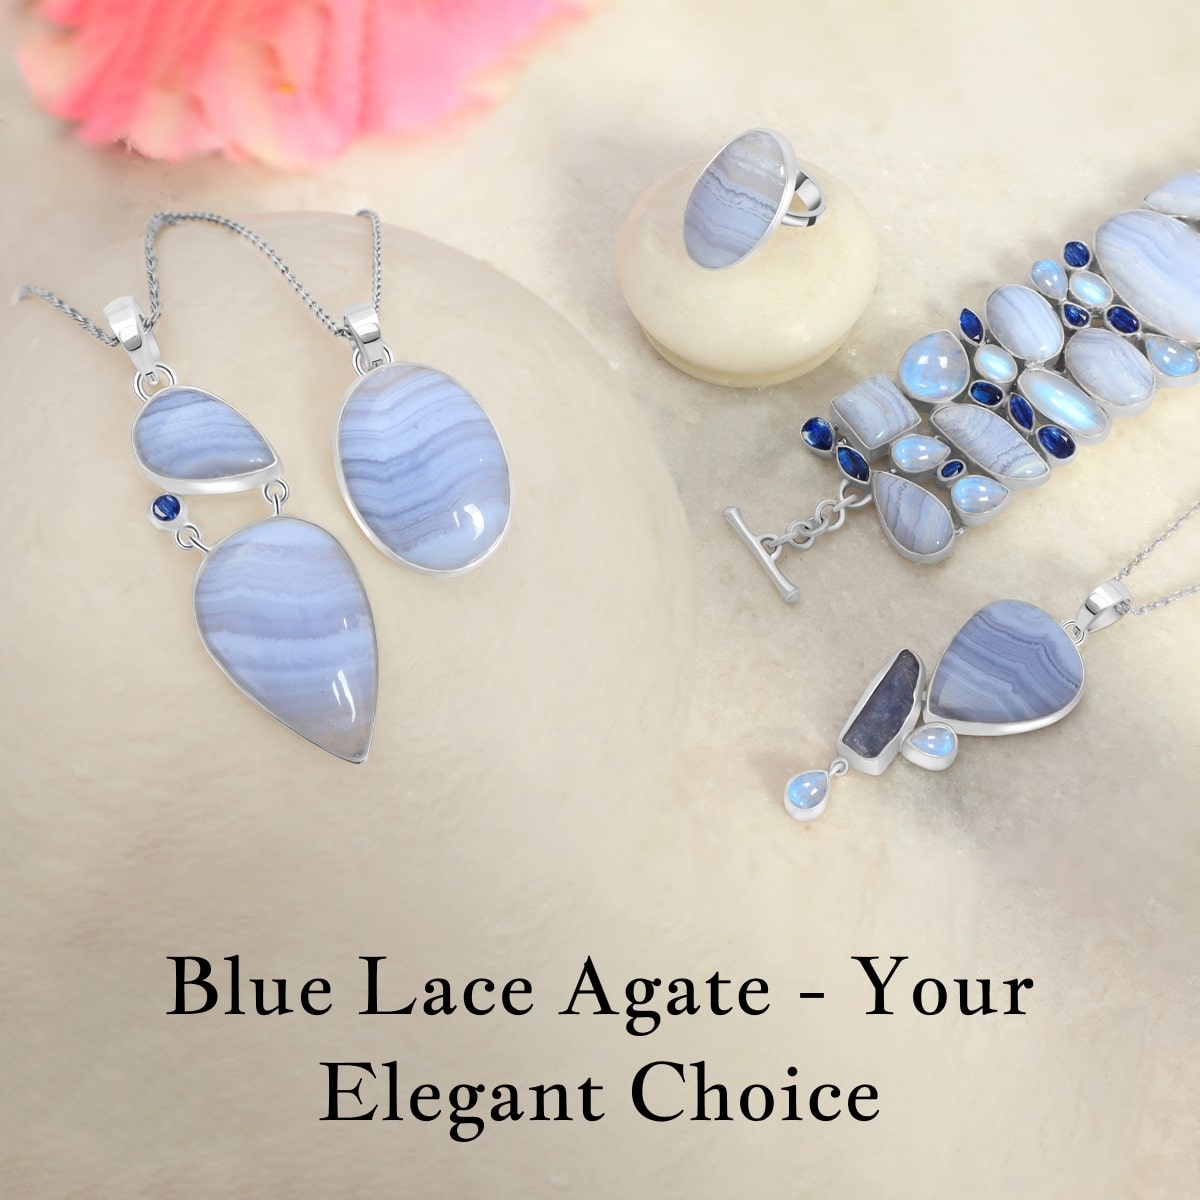 Why Should You Choose Blue Lace Agate